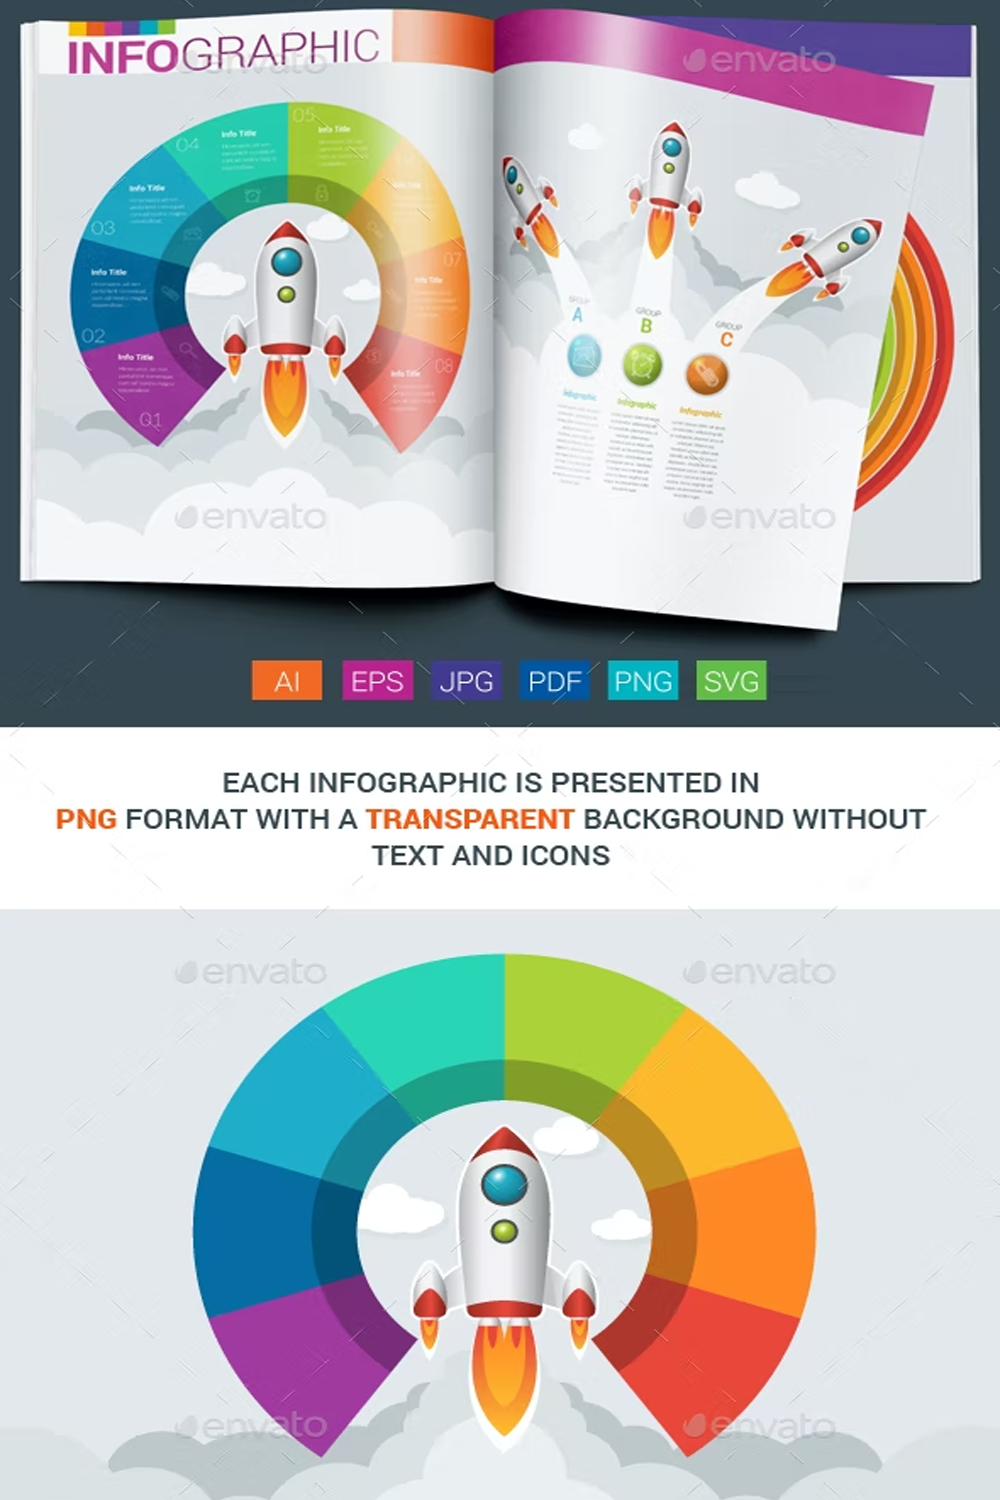 Illustrations business startup infographic of pinterest.